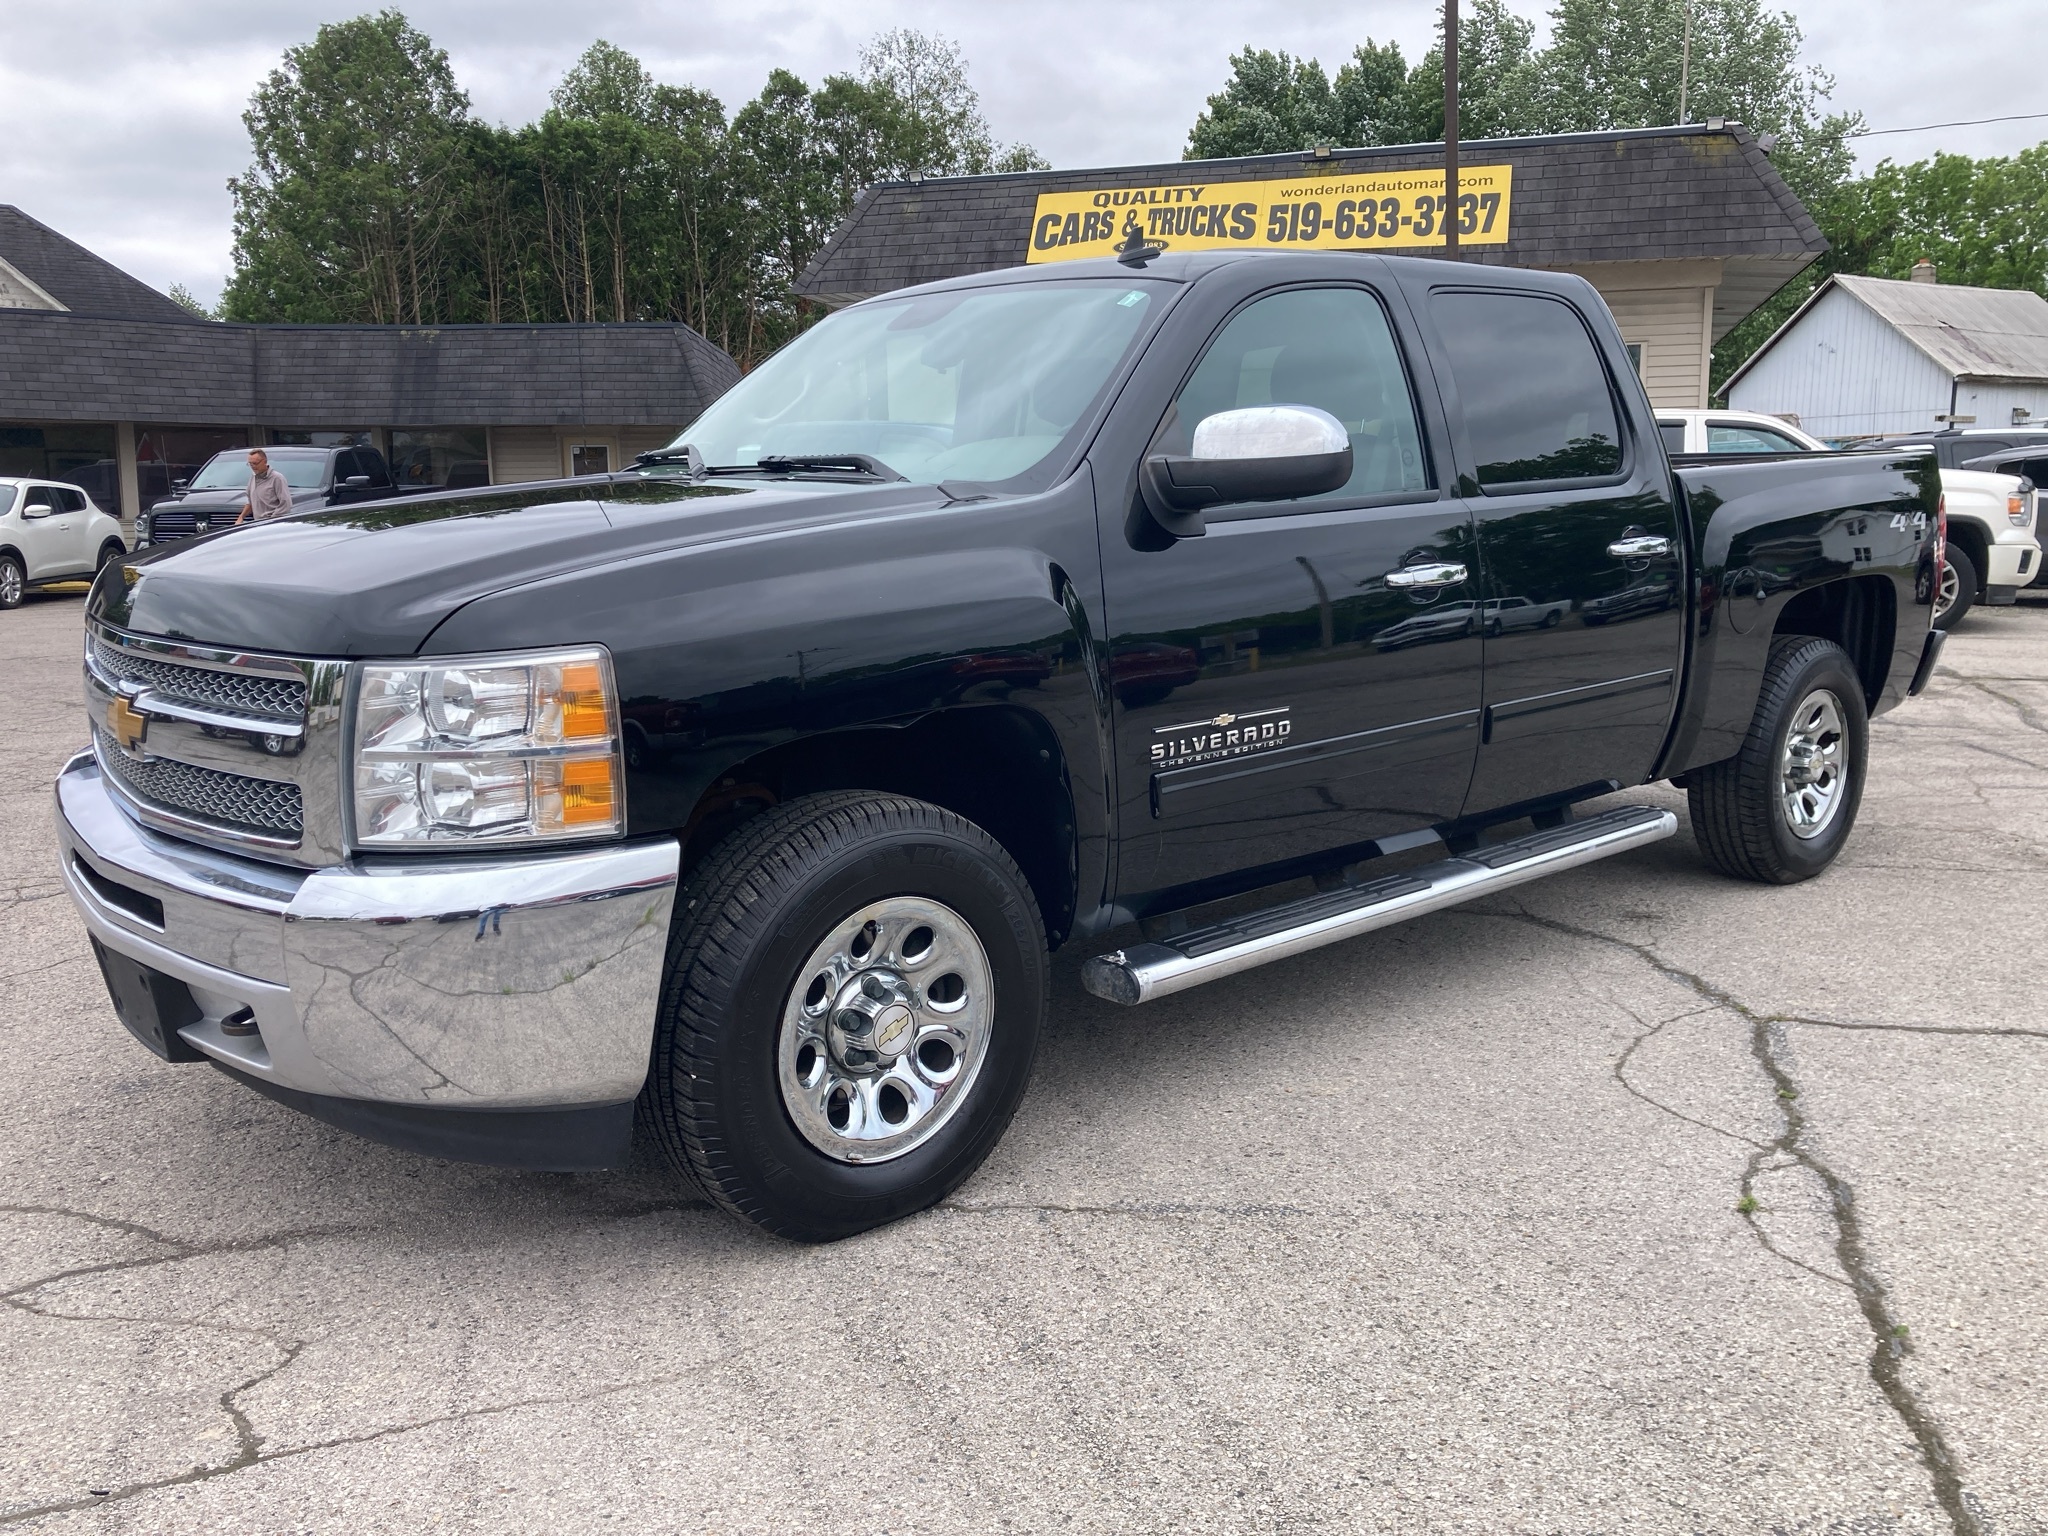 2012 Chevrolet Silverado 1500 LS Cheyenne Edition-4x4-One Owner-Tow Package